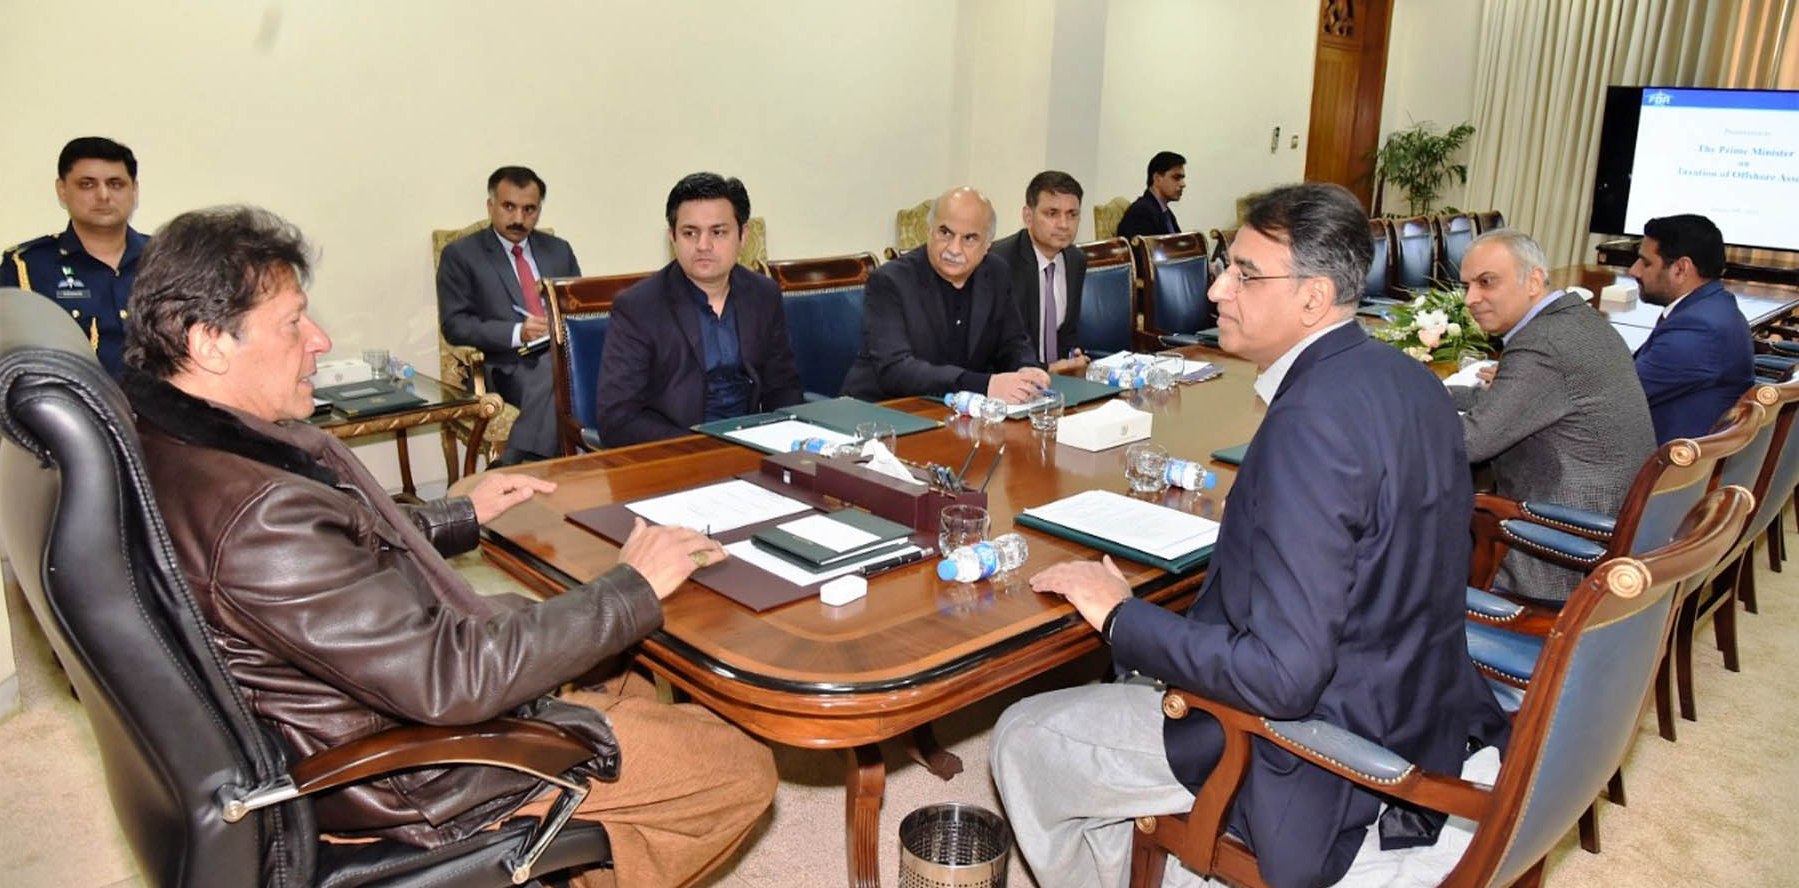 Prime Minister Imran Khan chairs meeting on FBR Reforms at PM's Office Islamabad on 30th January, 2019